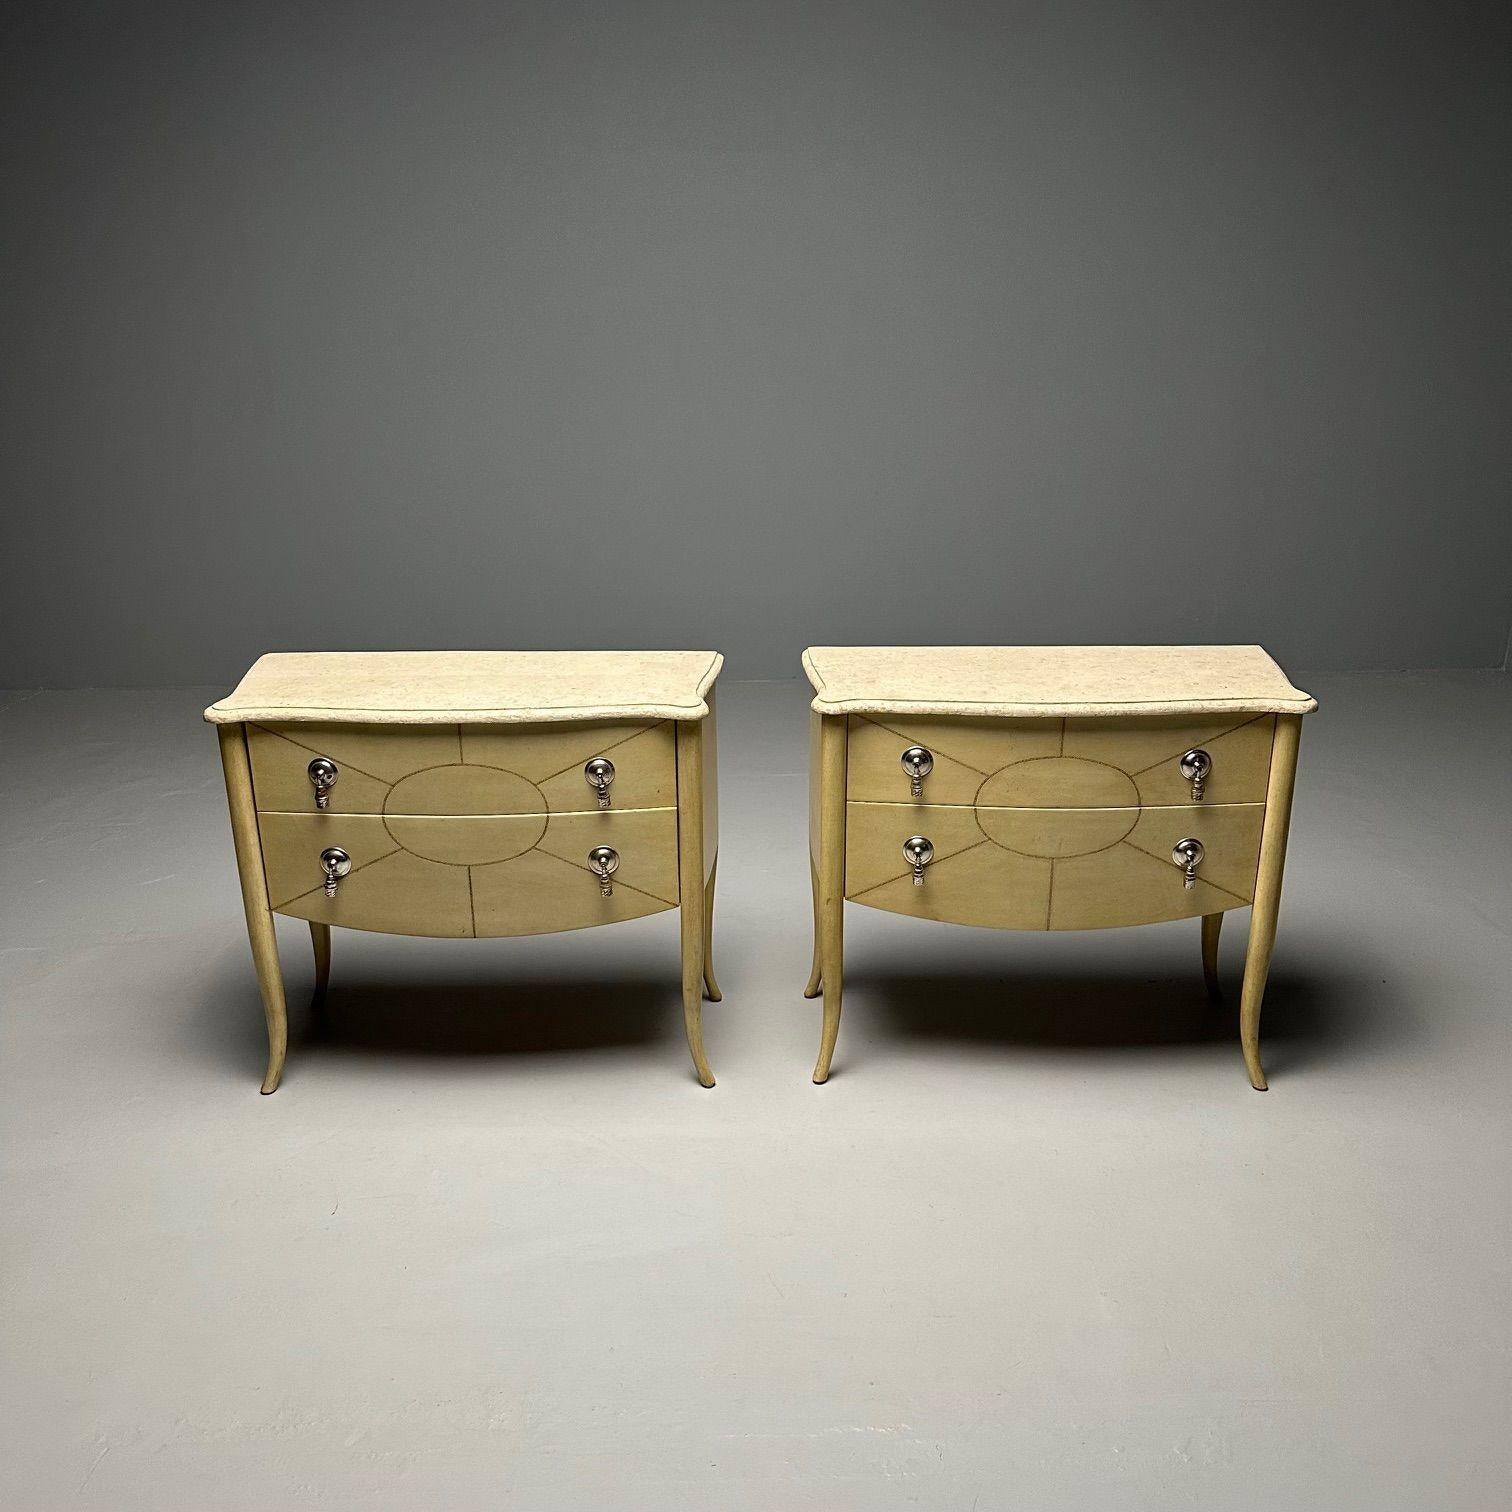 Andre Groult Style, Art Deco, Commodes, Beige Parchment Paper, Nickel, 1990s For Sale 1